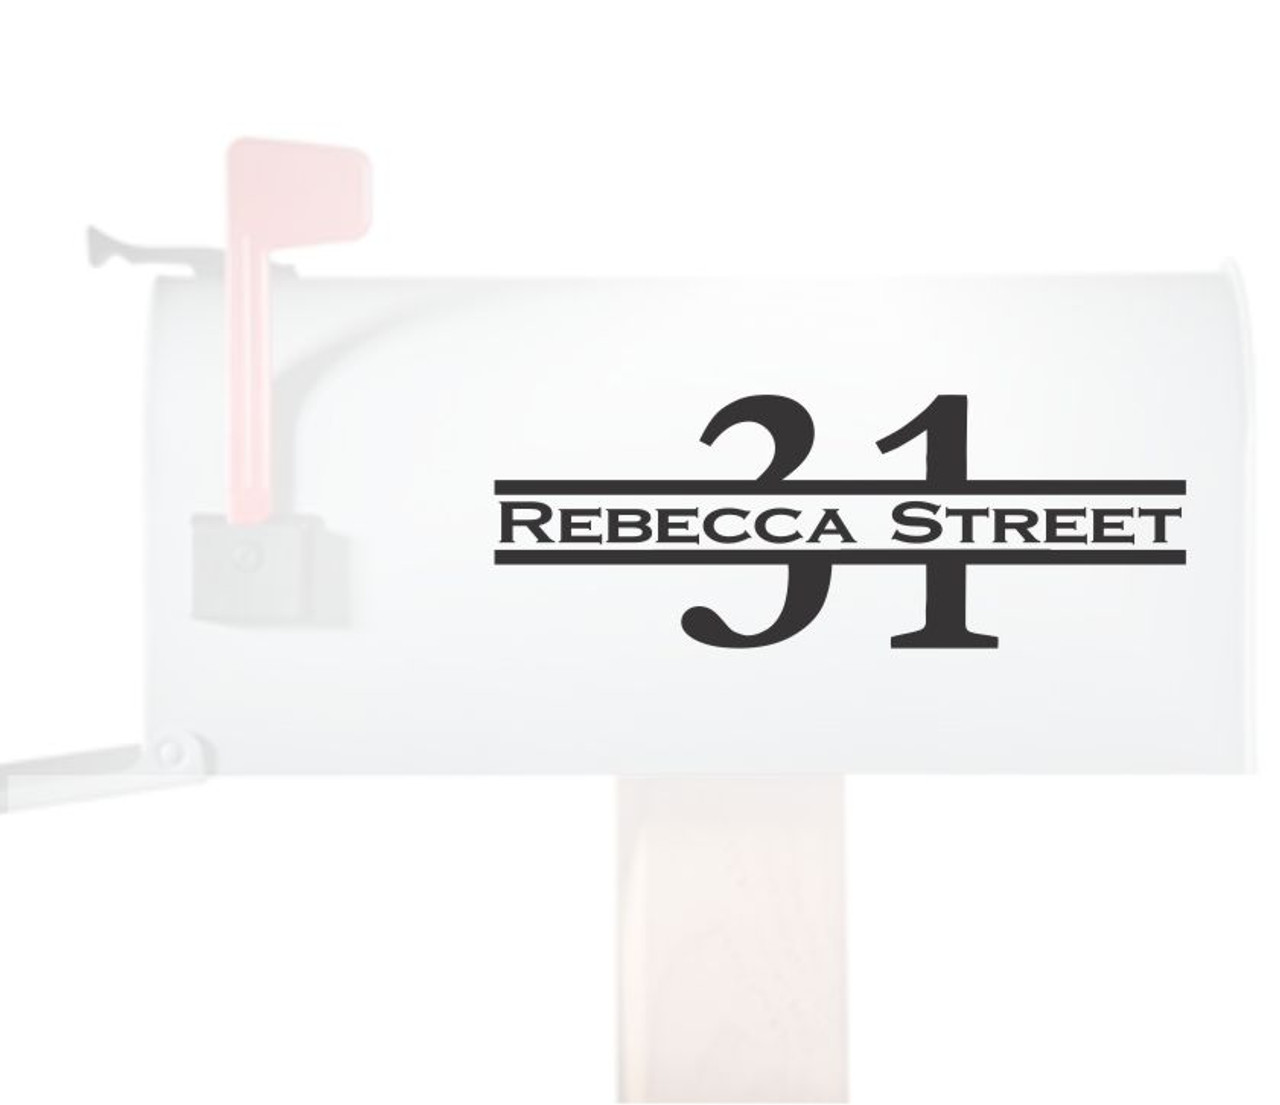 House Number and Name Mailbox - Glossy Black White Text